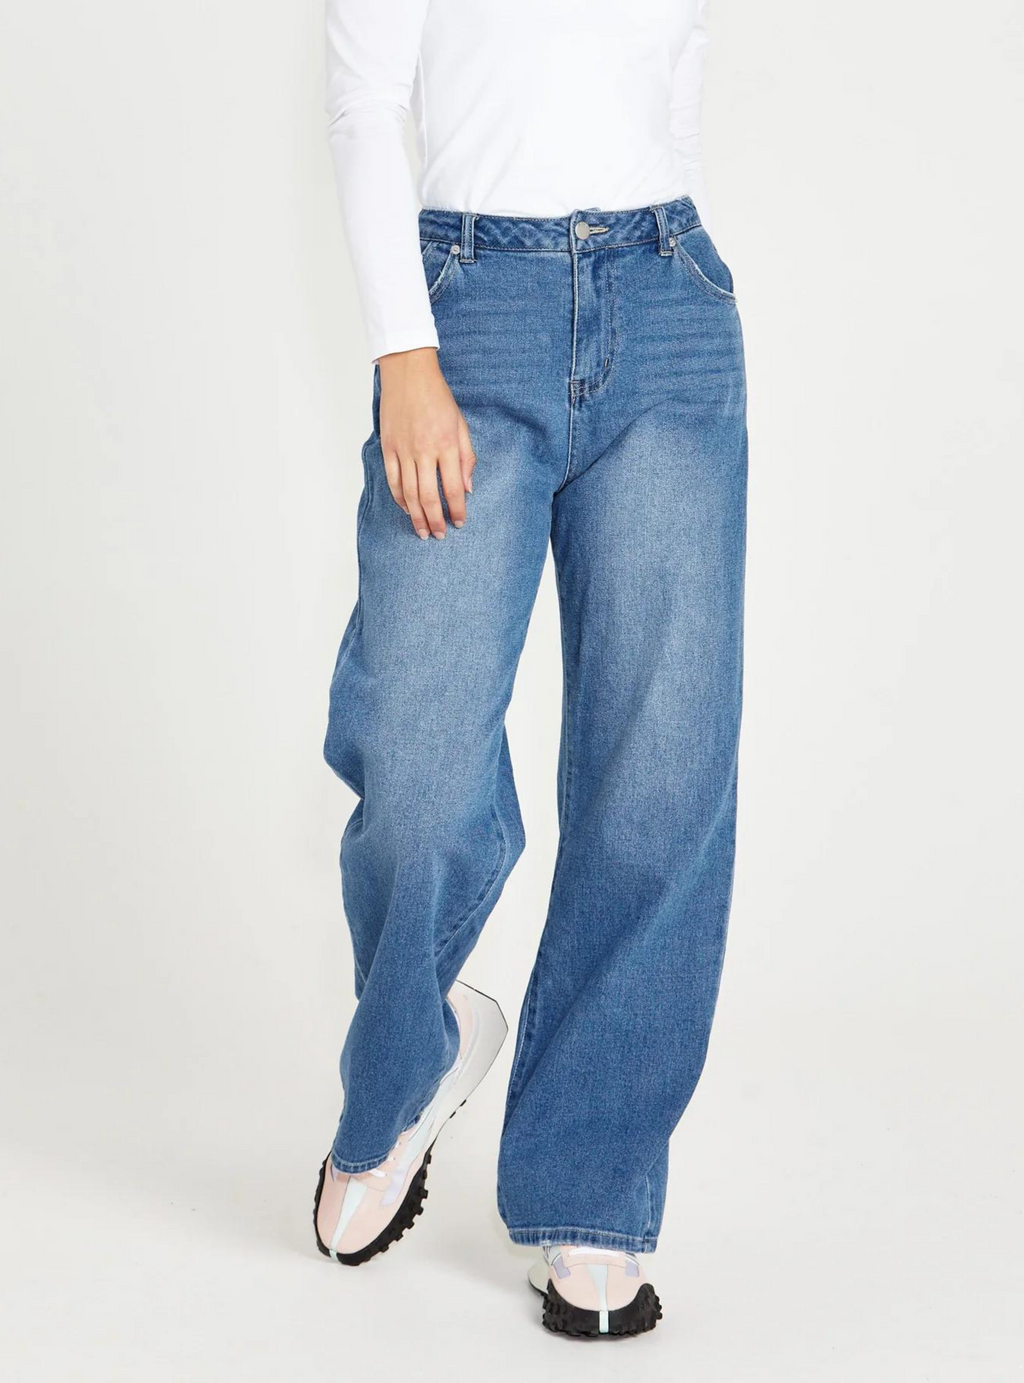 EMERALD HIGH WAISTED WIDE LEG JEANS - 80 Wash